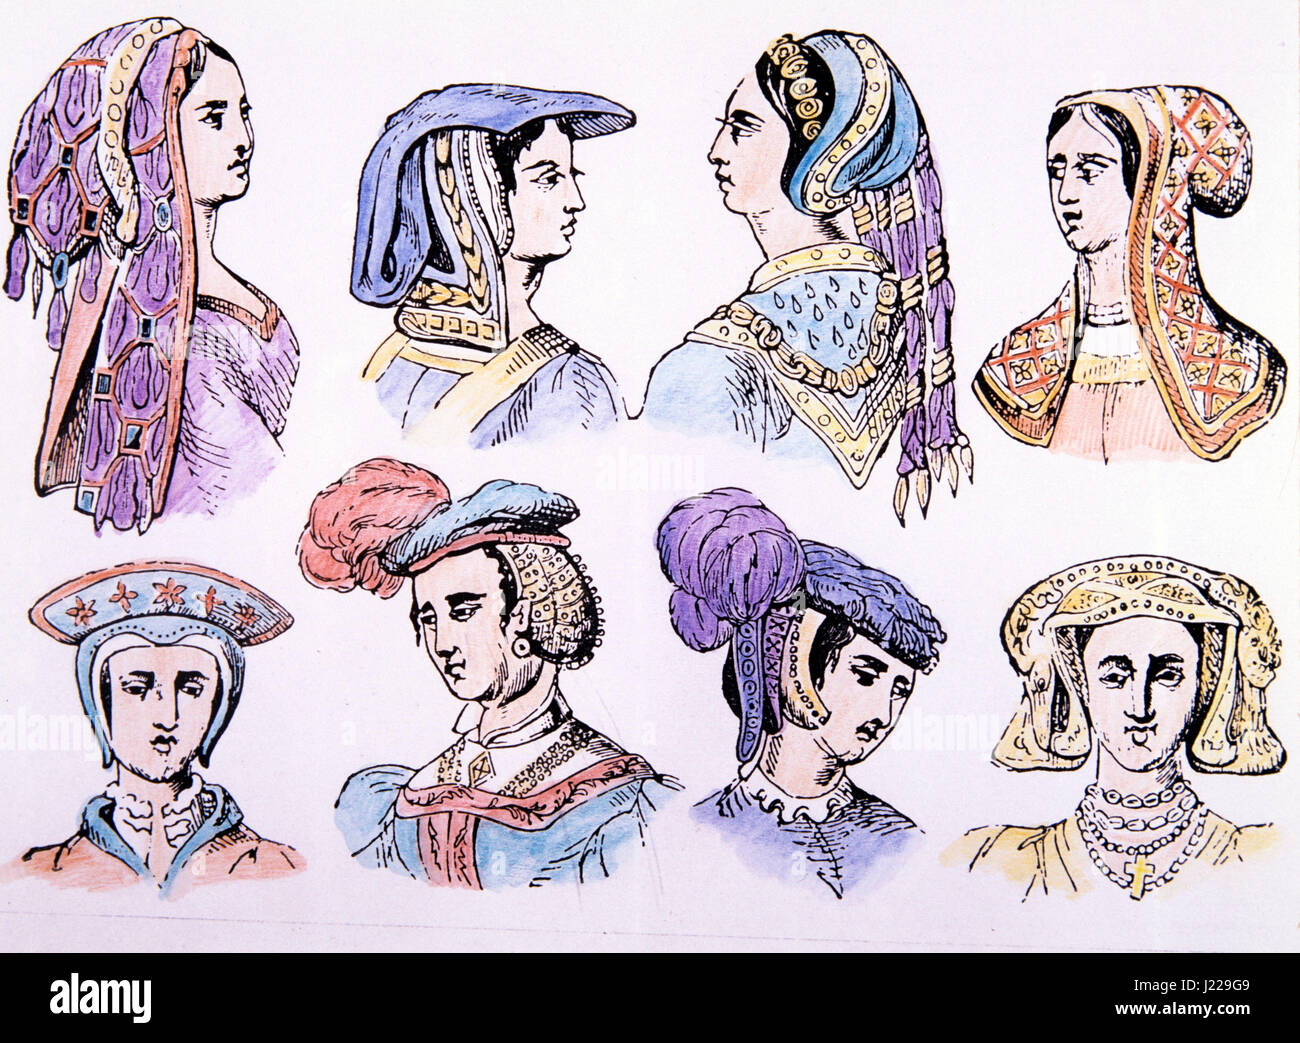 16th century Ladies hats.  From Old English engravings. Stock Photo